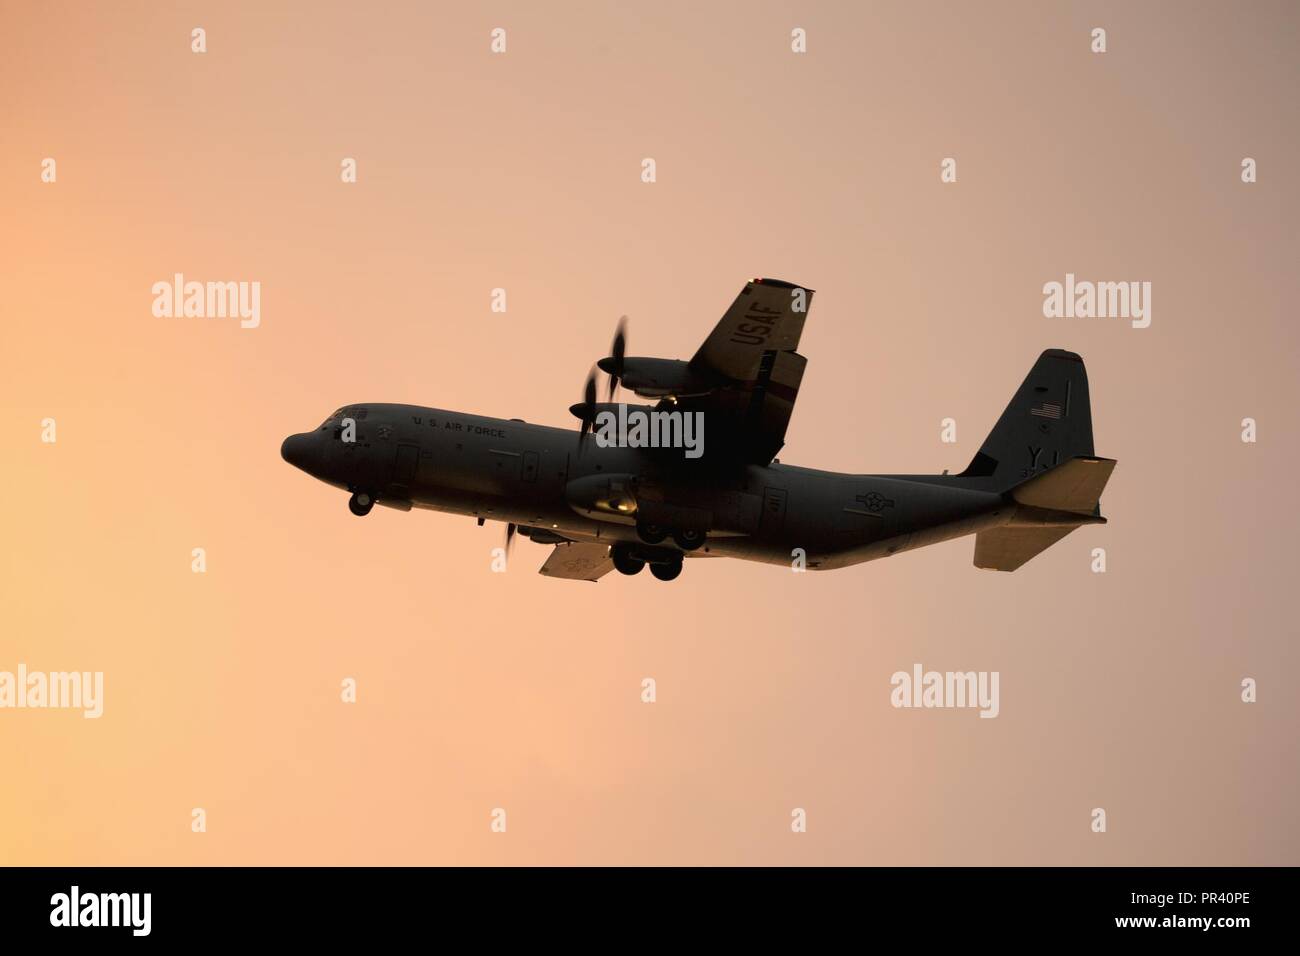 A C-130J Super Hercules from the 36th Airlift Squadron conducts a flight mission over Yokota Air Base, Japan, July 31, 2017. The C-130J provides tactical airlift worldwide and its flexible design allows it to operate in austere environments. Stock Photo